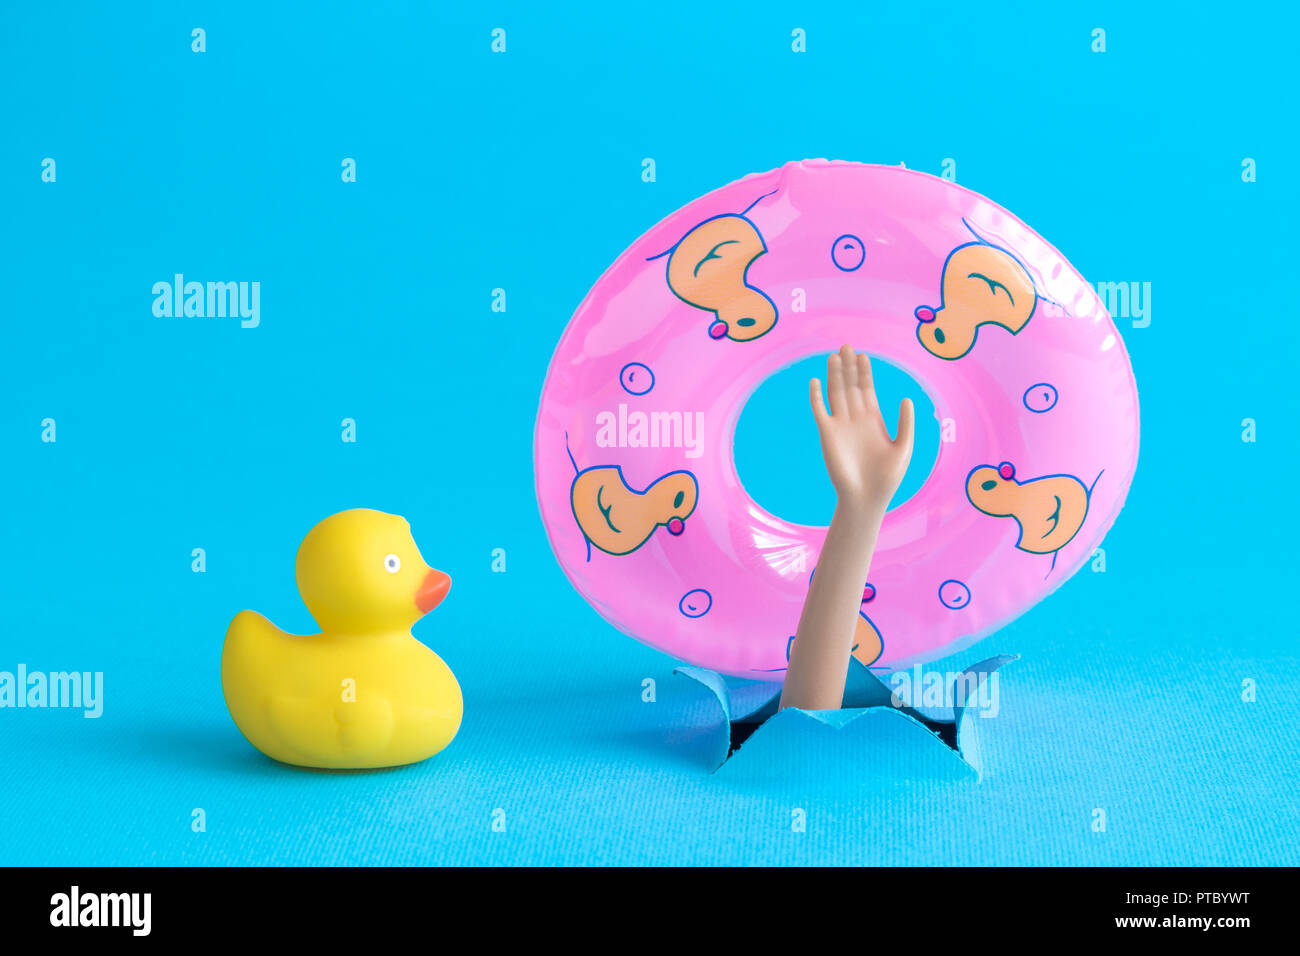 Rubber duck next to doll arm holding inflatable pool float and emerging from blue paper background. Drowning minimal creative abstract concept. Stock Photo